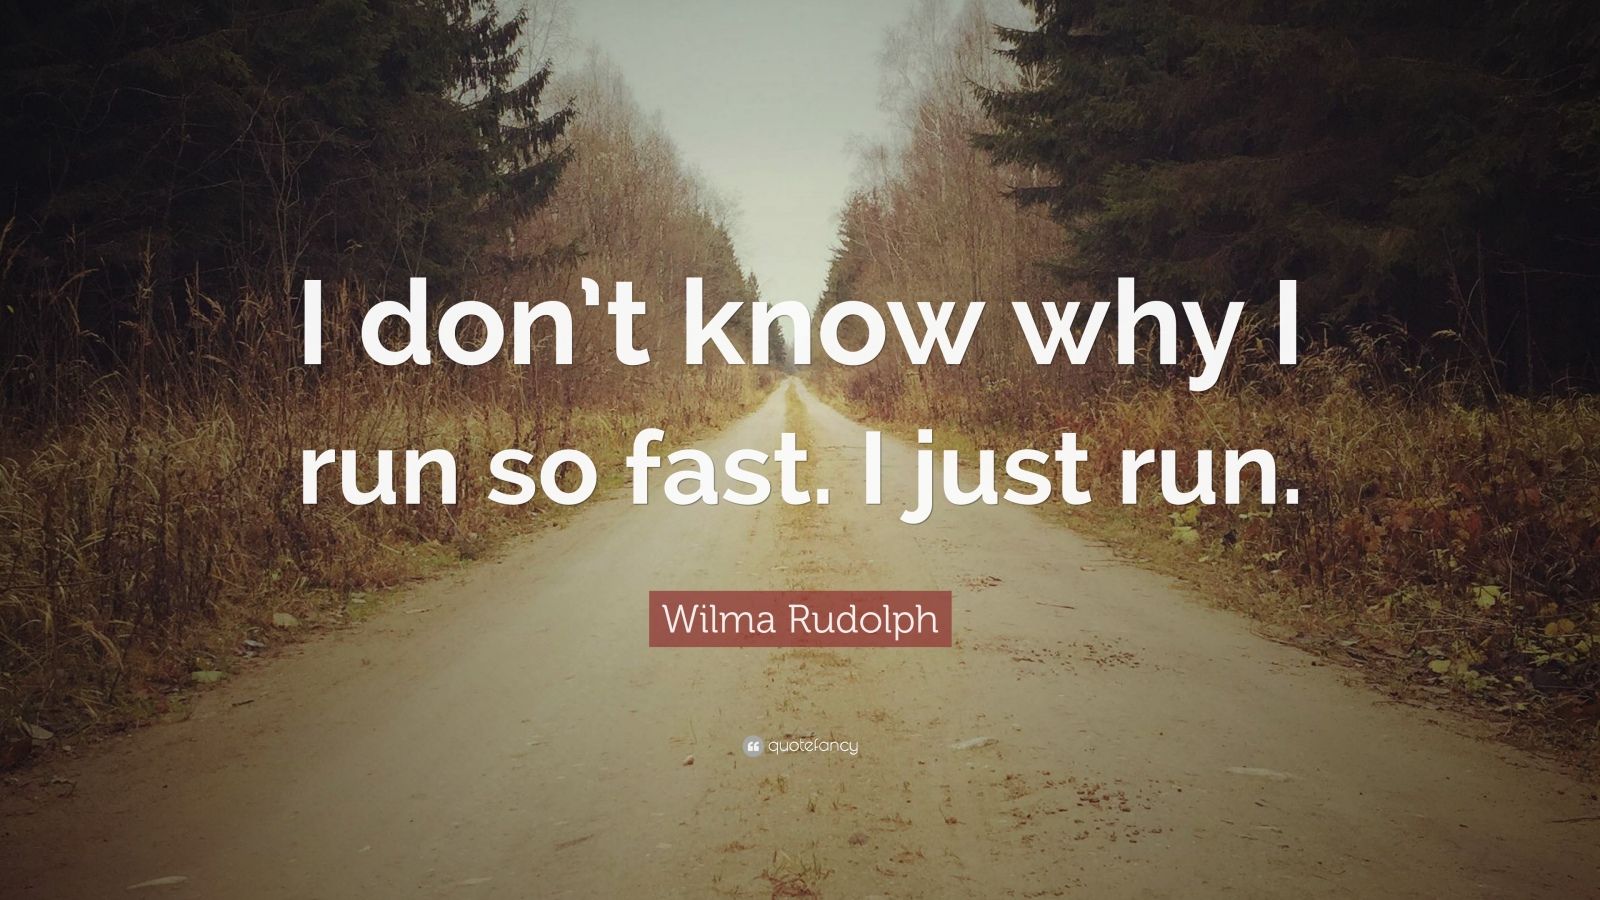 Wilma Rudolph Quotes (26 wallpapers) - Quotefancy